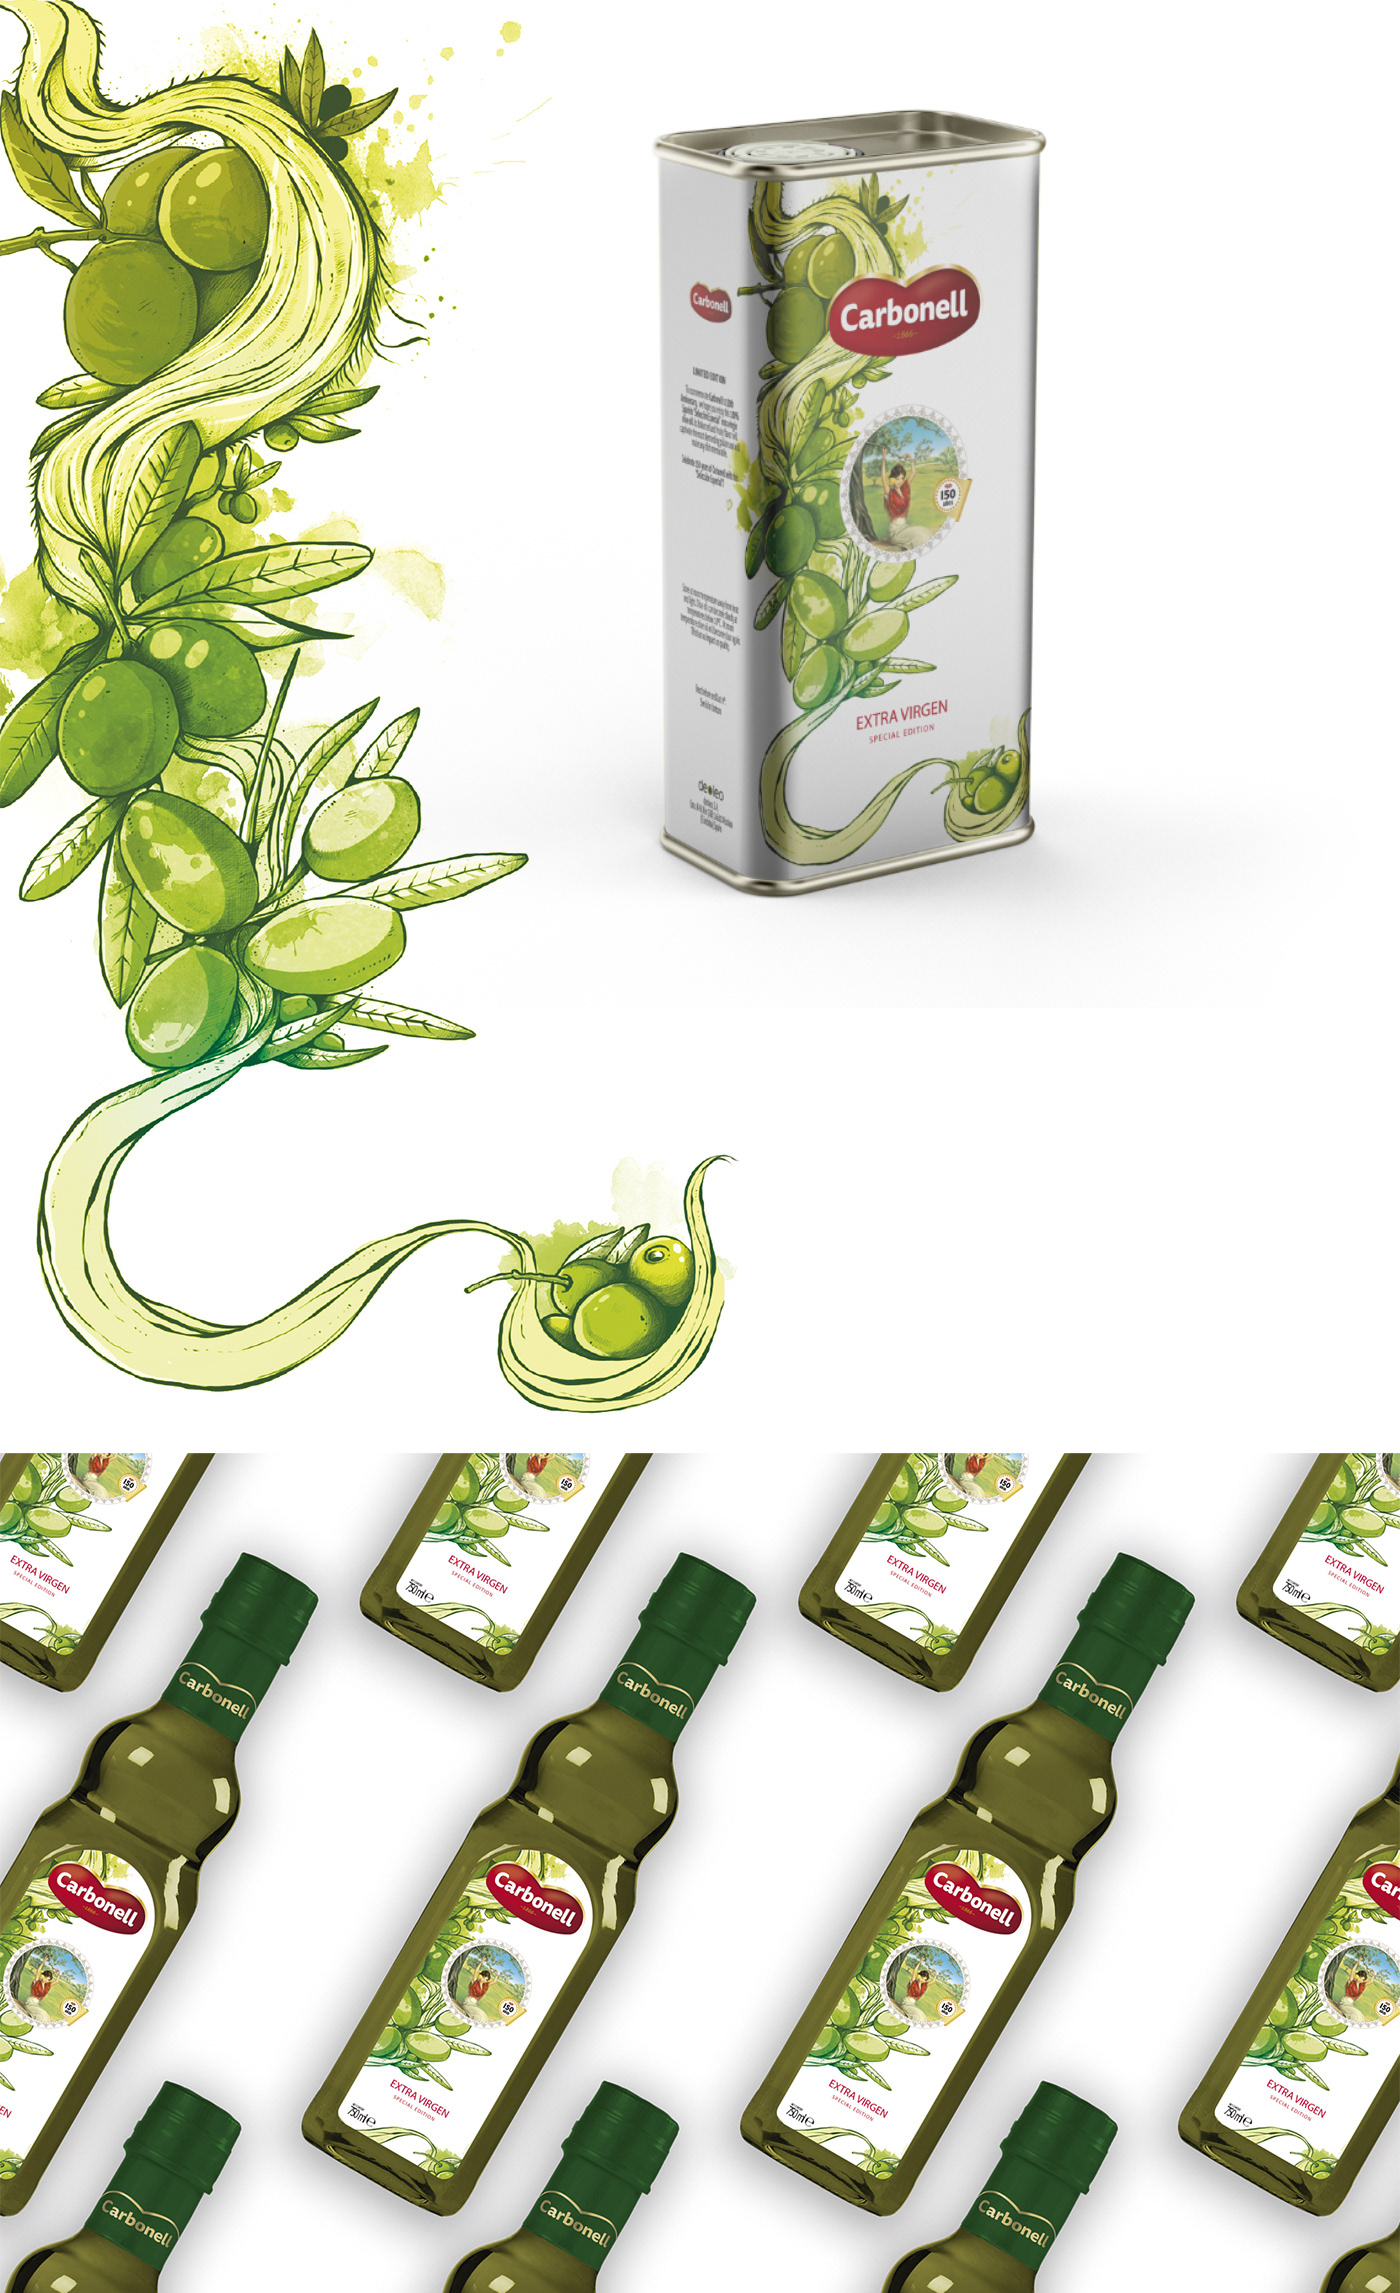 Packaging oscar llorens diseño carbonell aceite Olive Oil